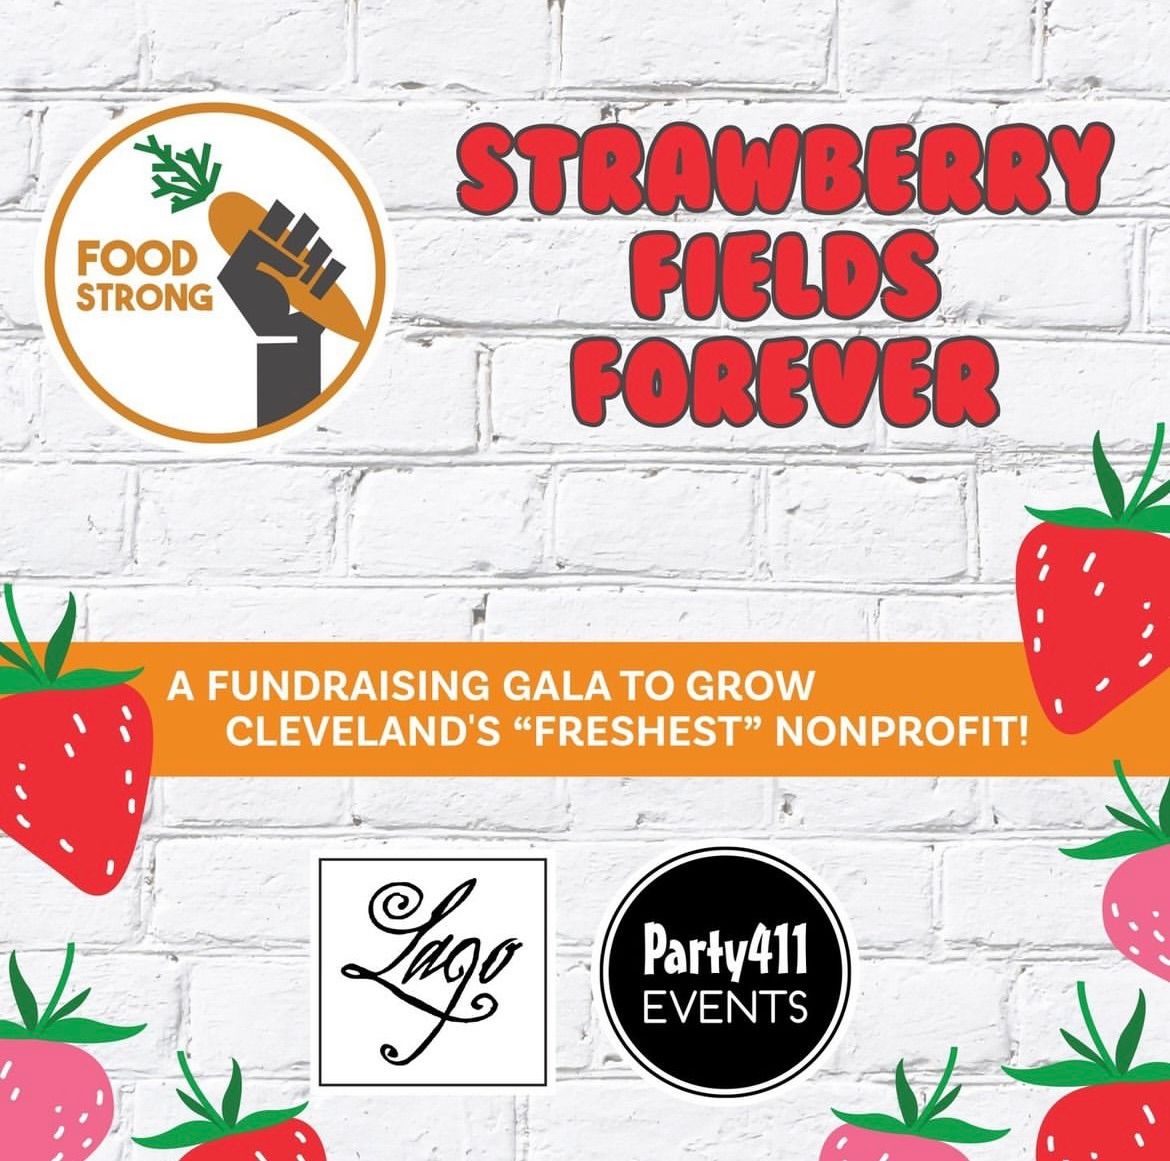 Annual Food Strong Gala Strawberry Fields Forever Beatles themed event! 